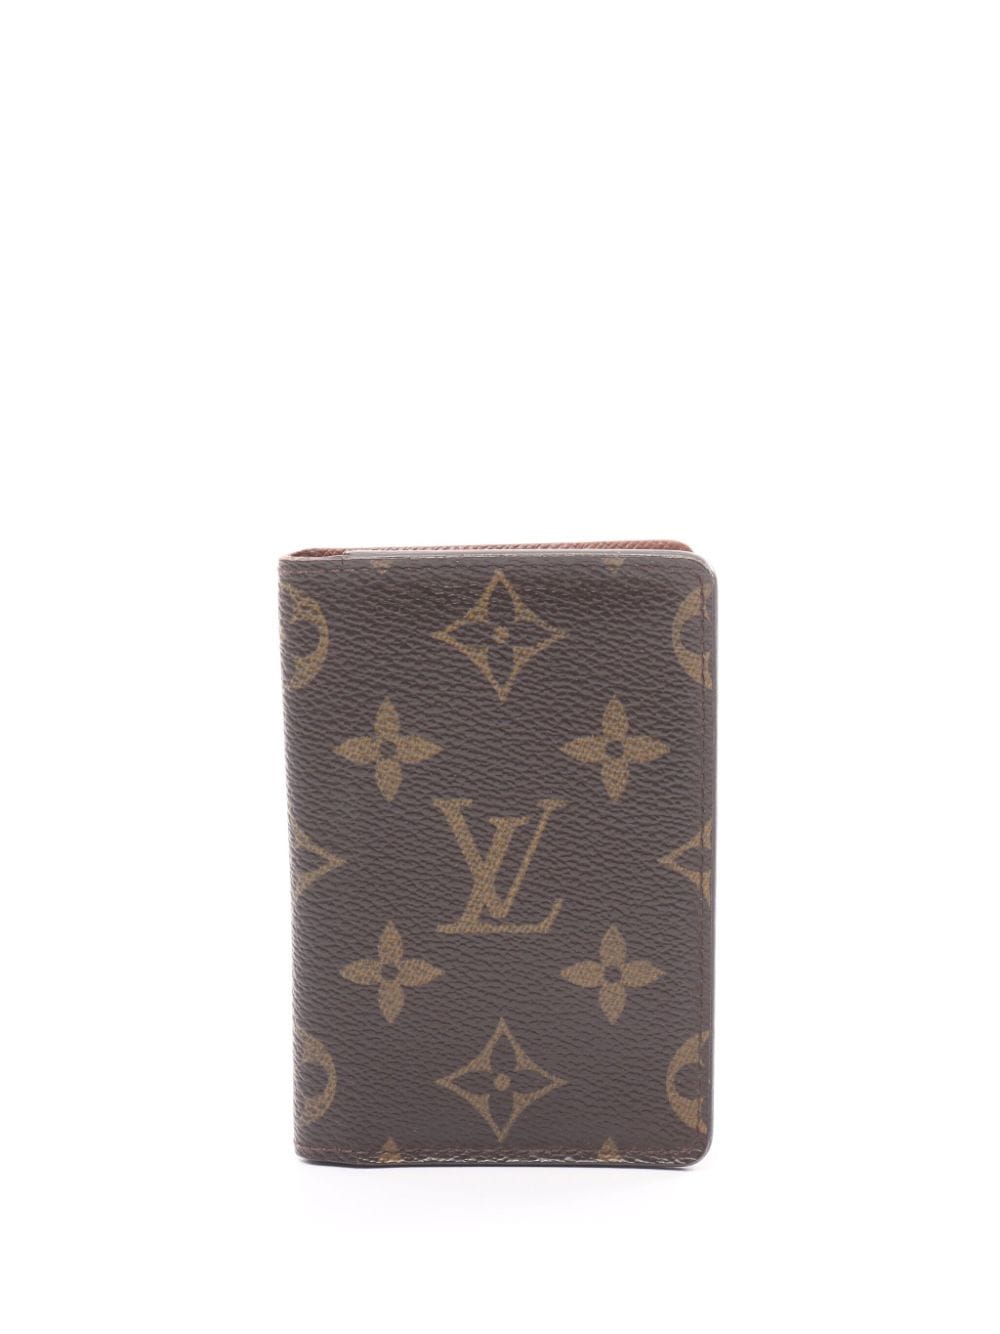 Pre-owned Louis Vuitton 2006 Pocket Organizer Wallet In Brown